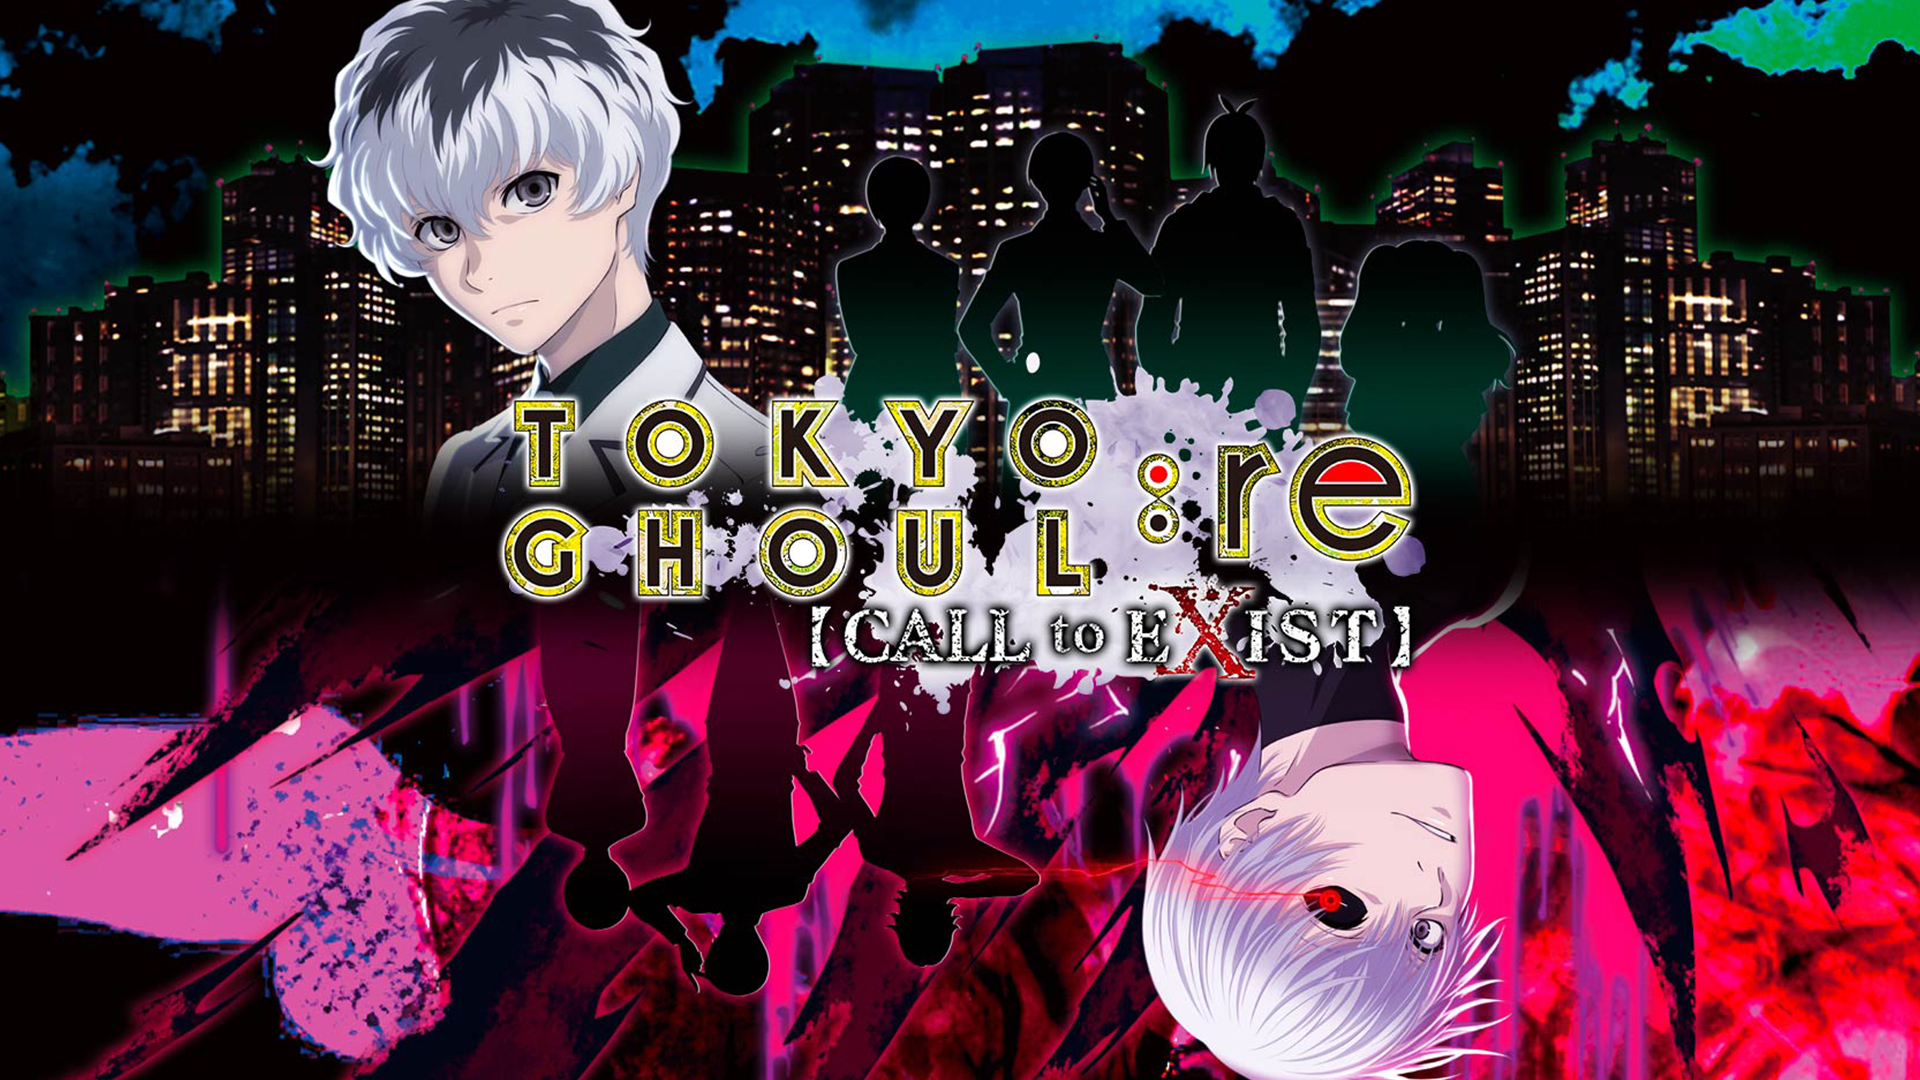 TOKYO GHOUL CALL EXIST do.php?img=27847